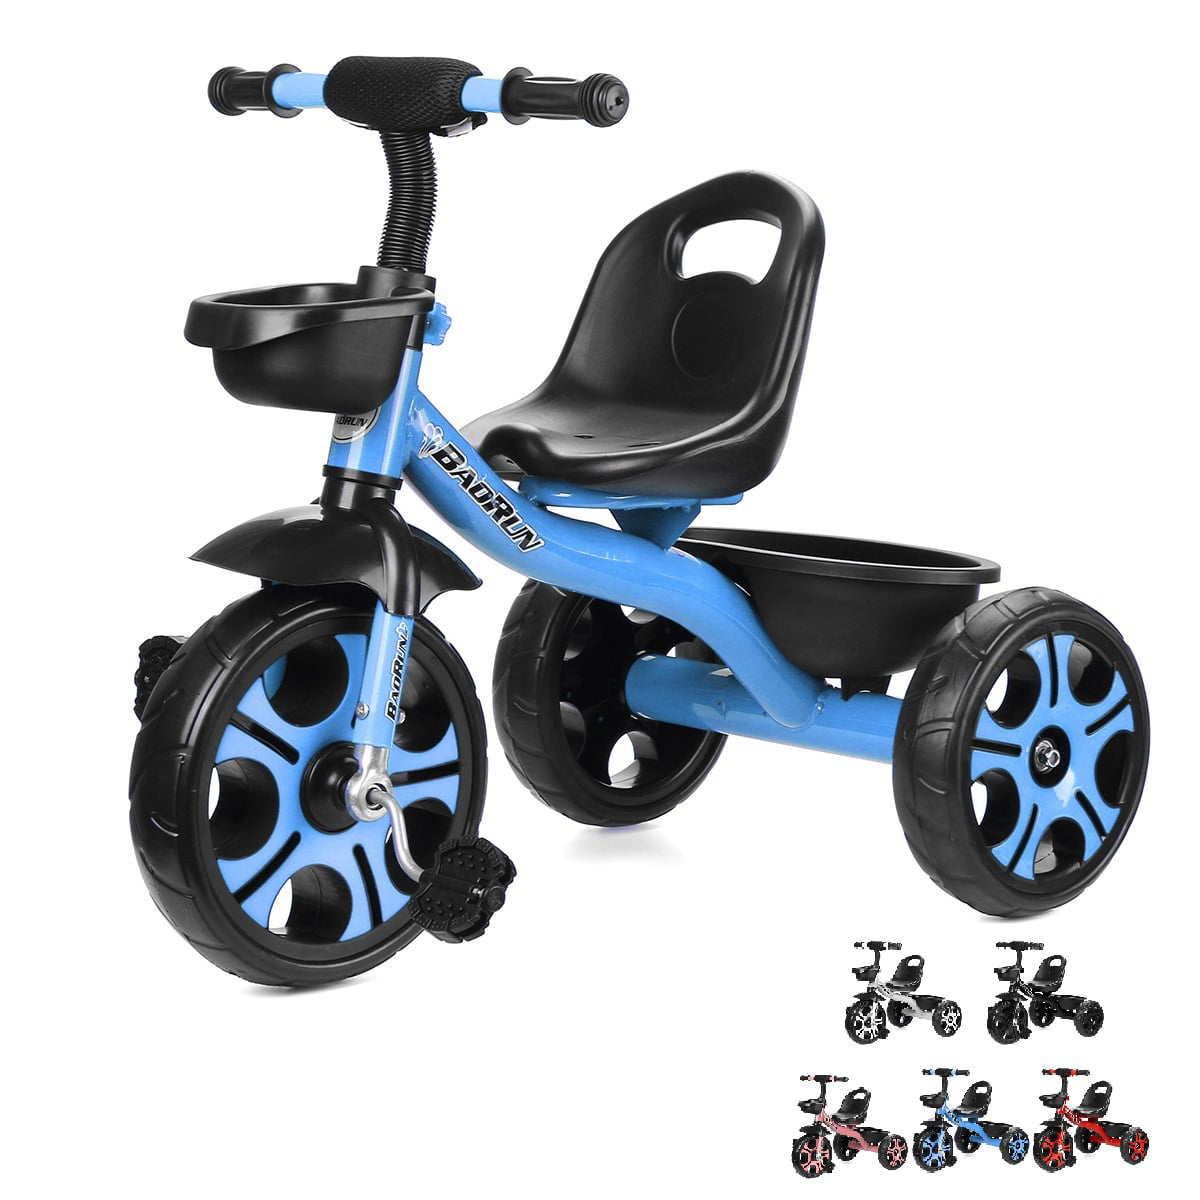 Childrens Tricycle Foldable Foot Pedal 1-6 Year Old Baby Push Pedal Bike Kindergarten Stroller Seat Can Be Adjusted Front and Back